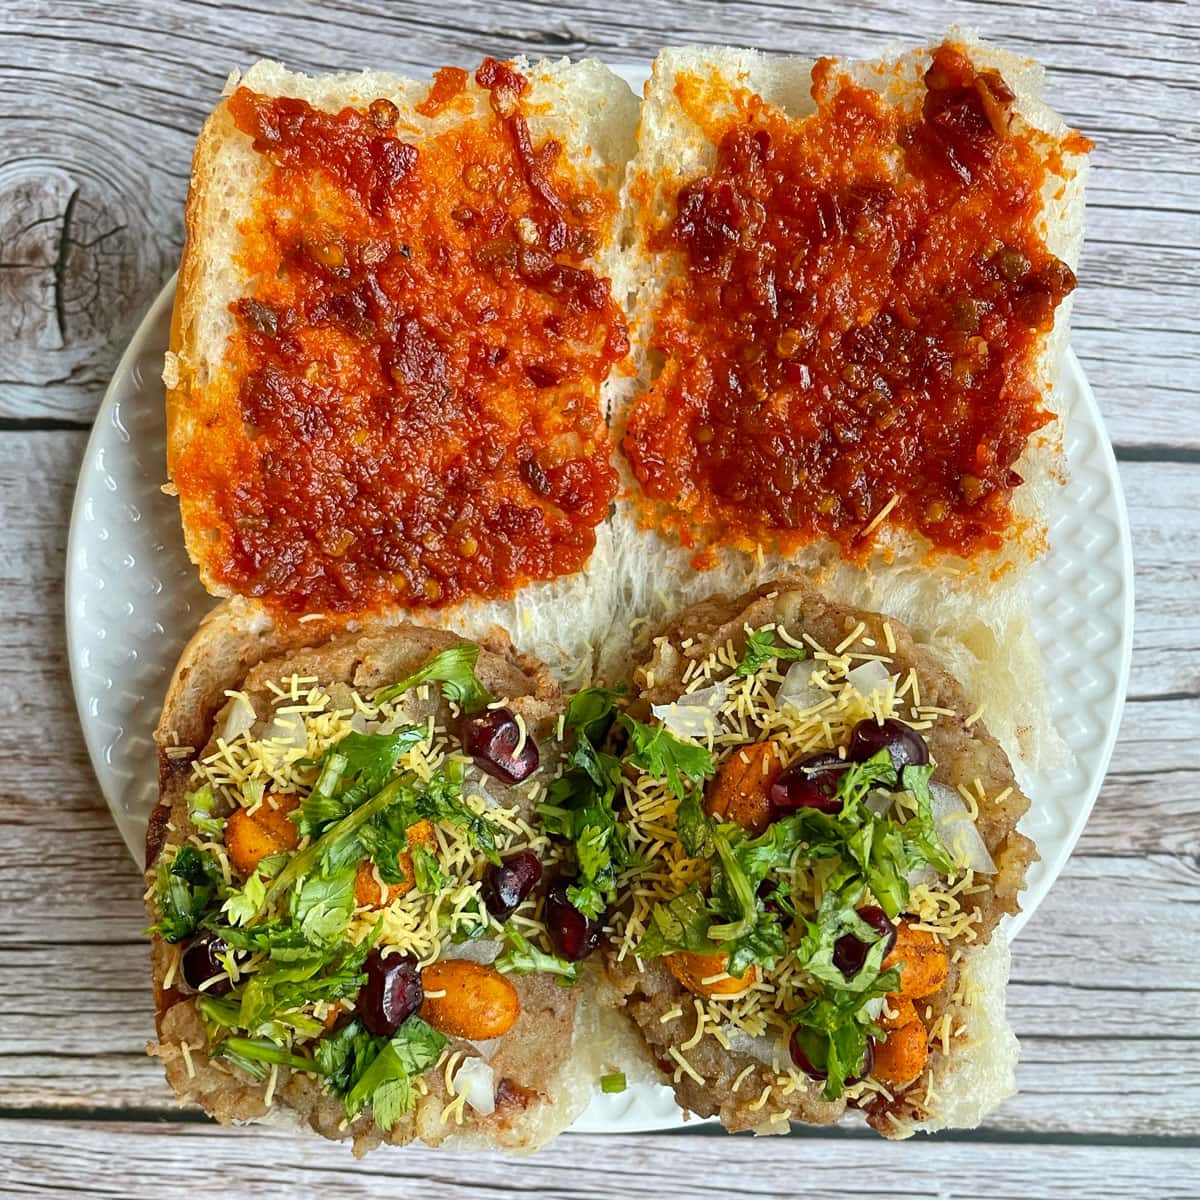 Dabeli with chutney and stuffing.